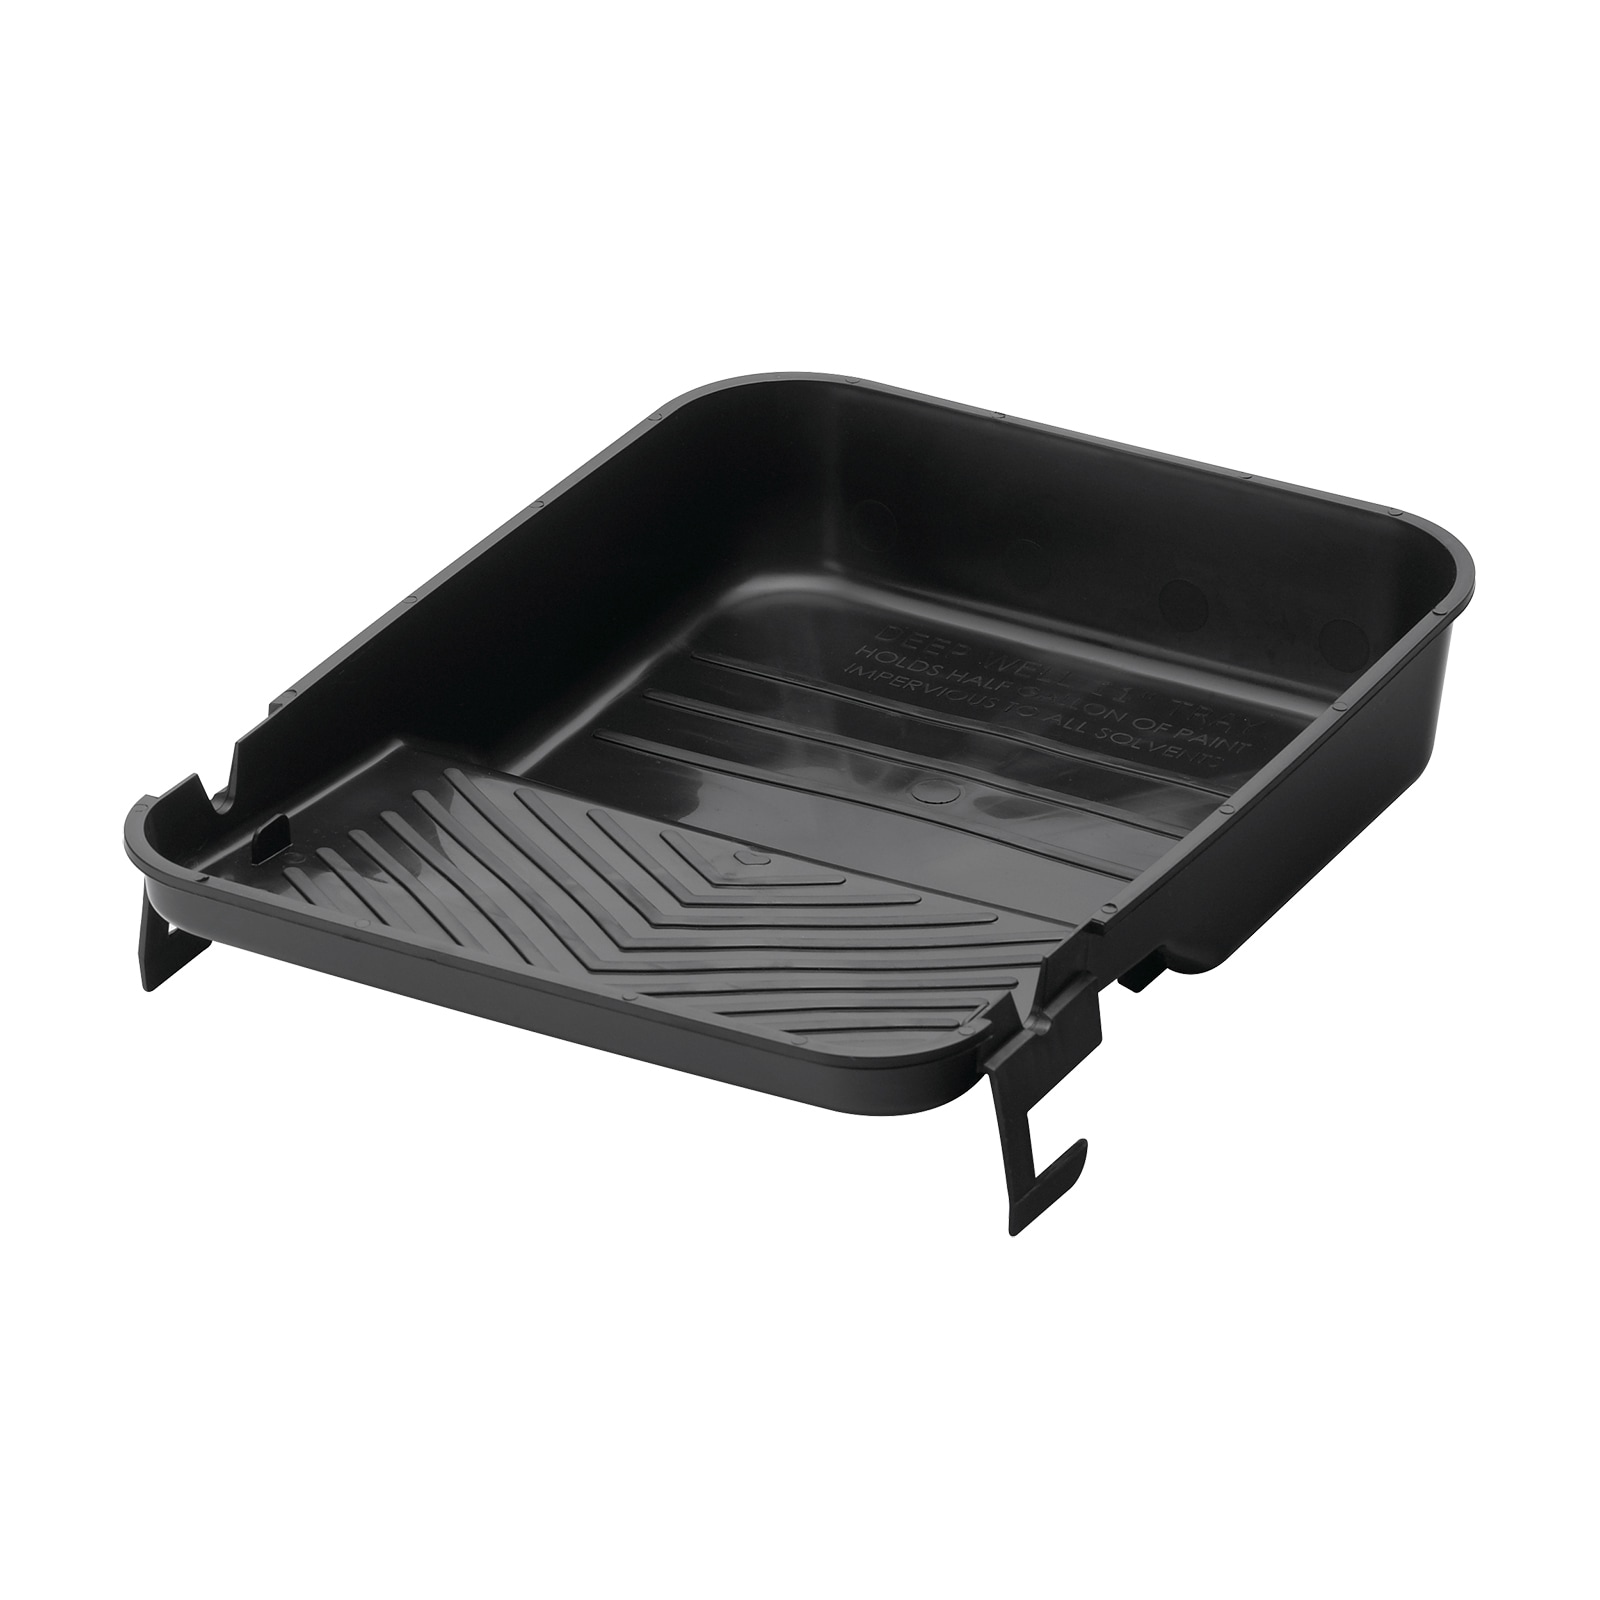 Midstate Plastics 202146 Black Shallow Paint Tray Liner for Metal Paint Trays - Quantity of 50